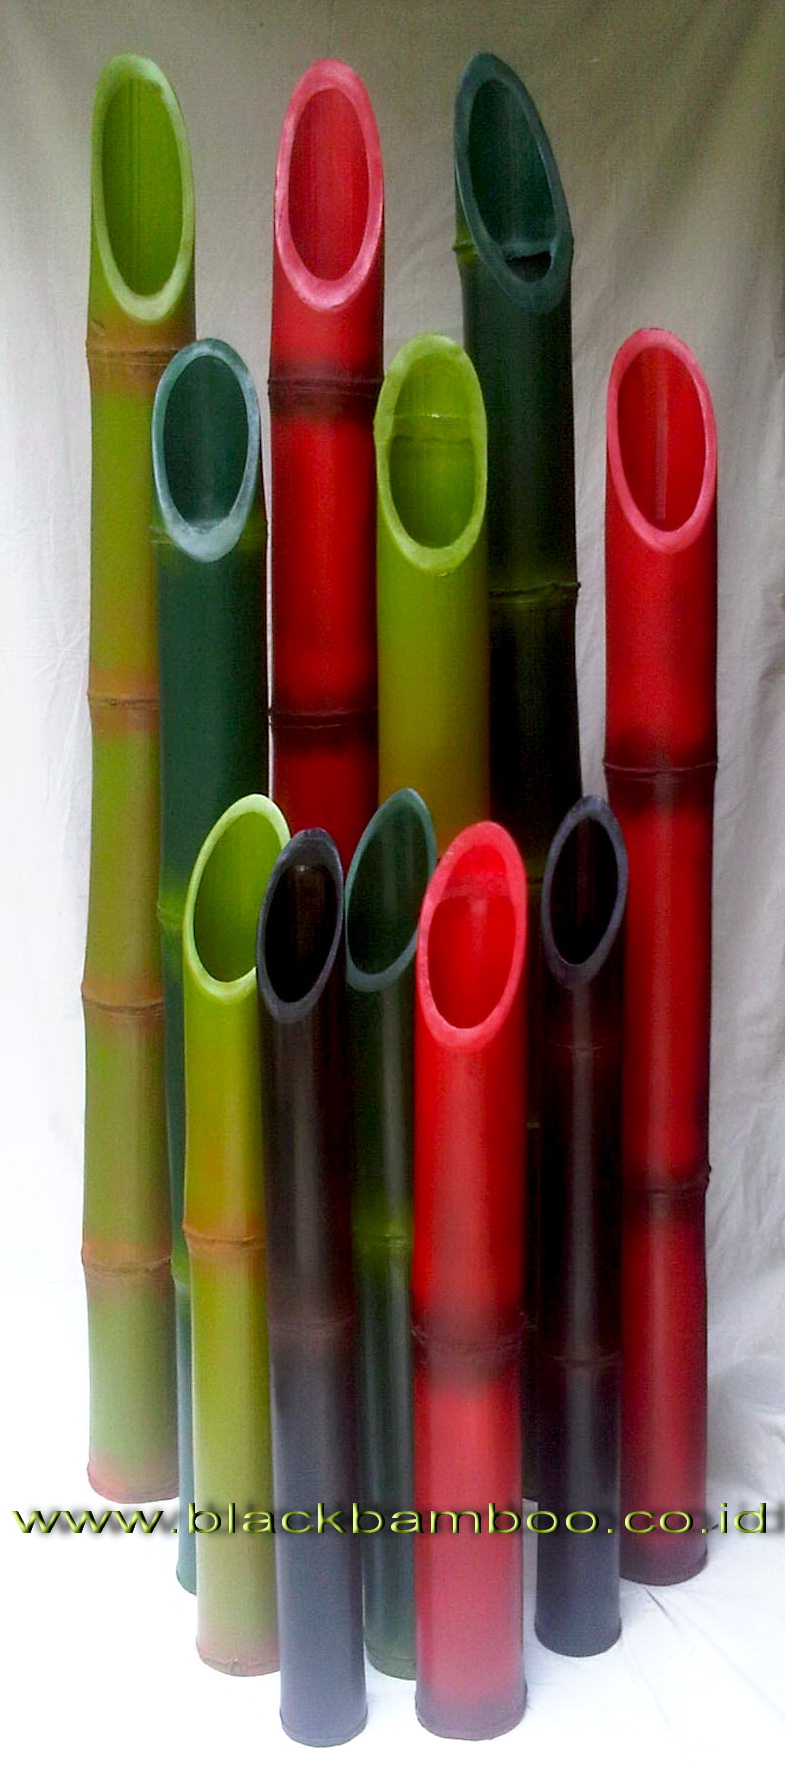 COLORFUL BAMBOO POLES